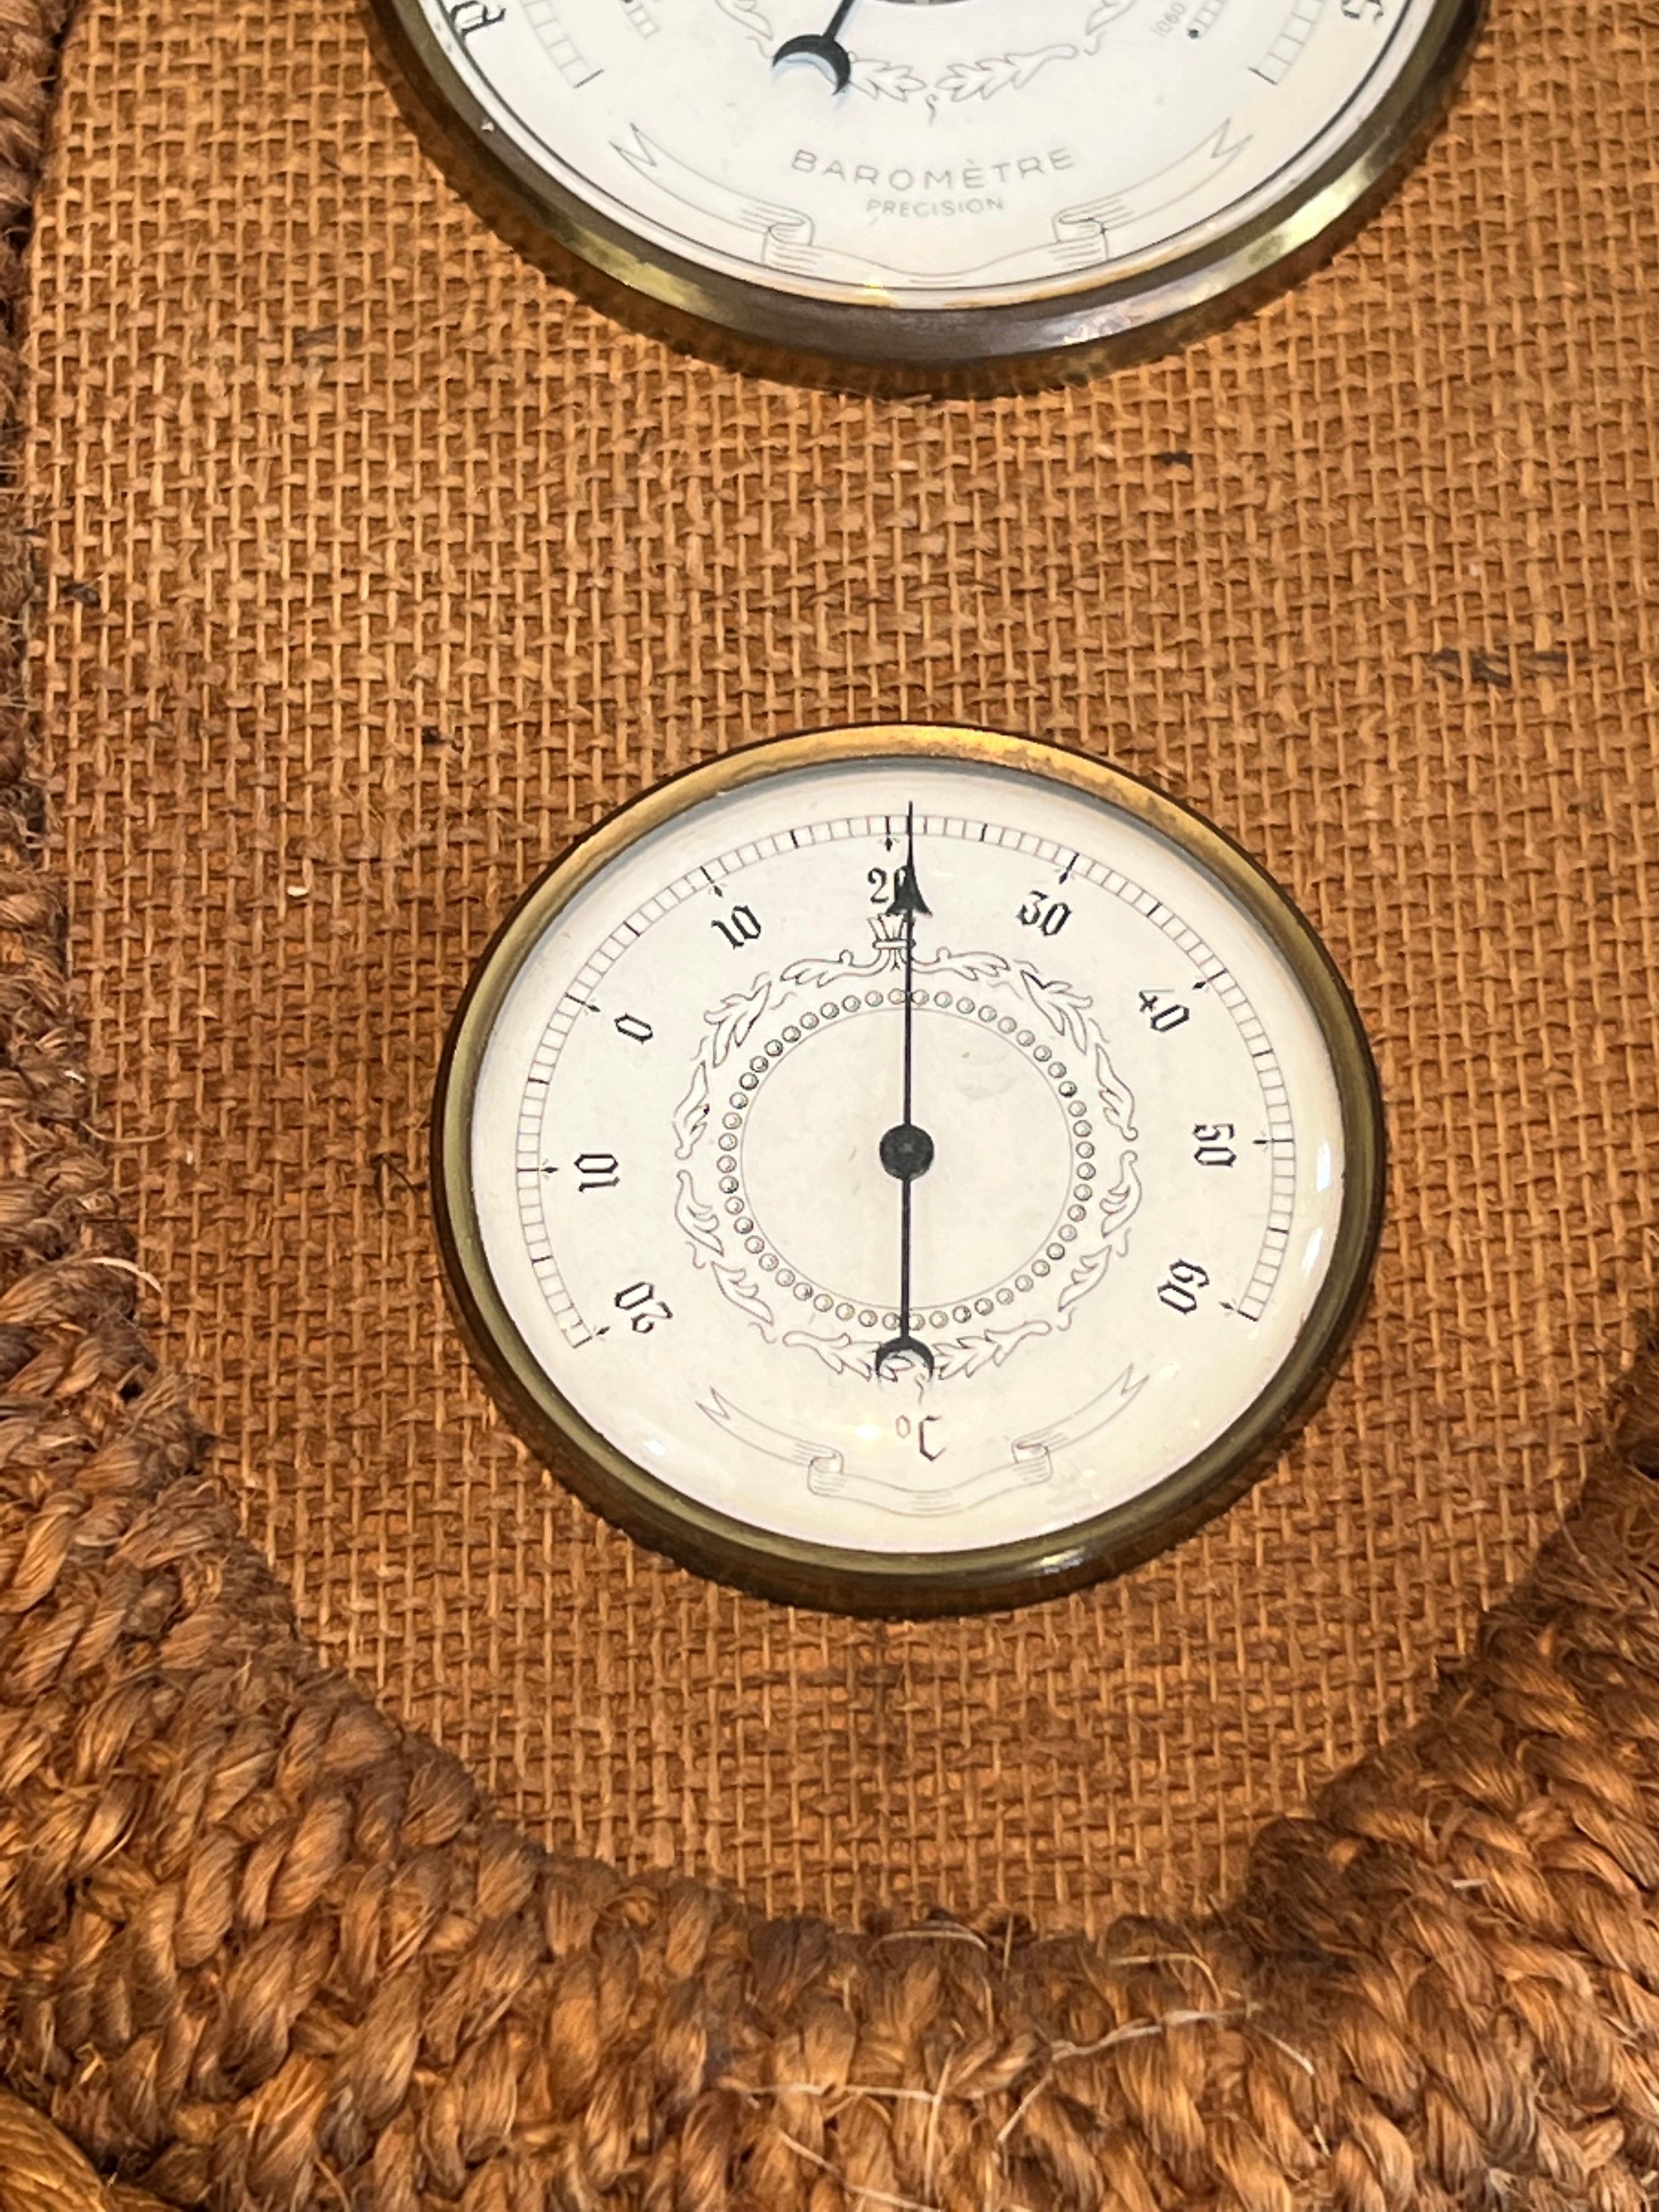 Rope Barometer. French Work by Adrien Audoux & Frida Minet, circa 1950 For Sale 3